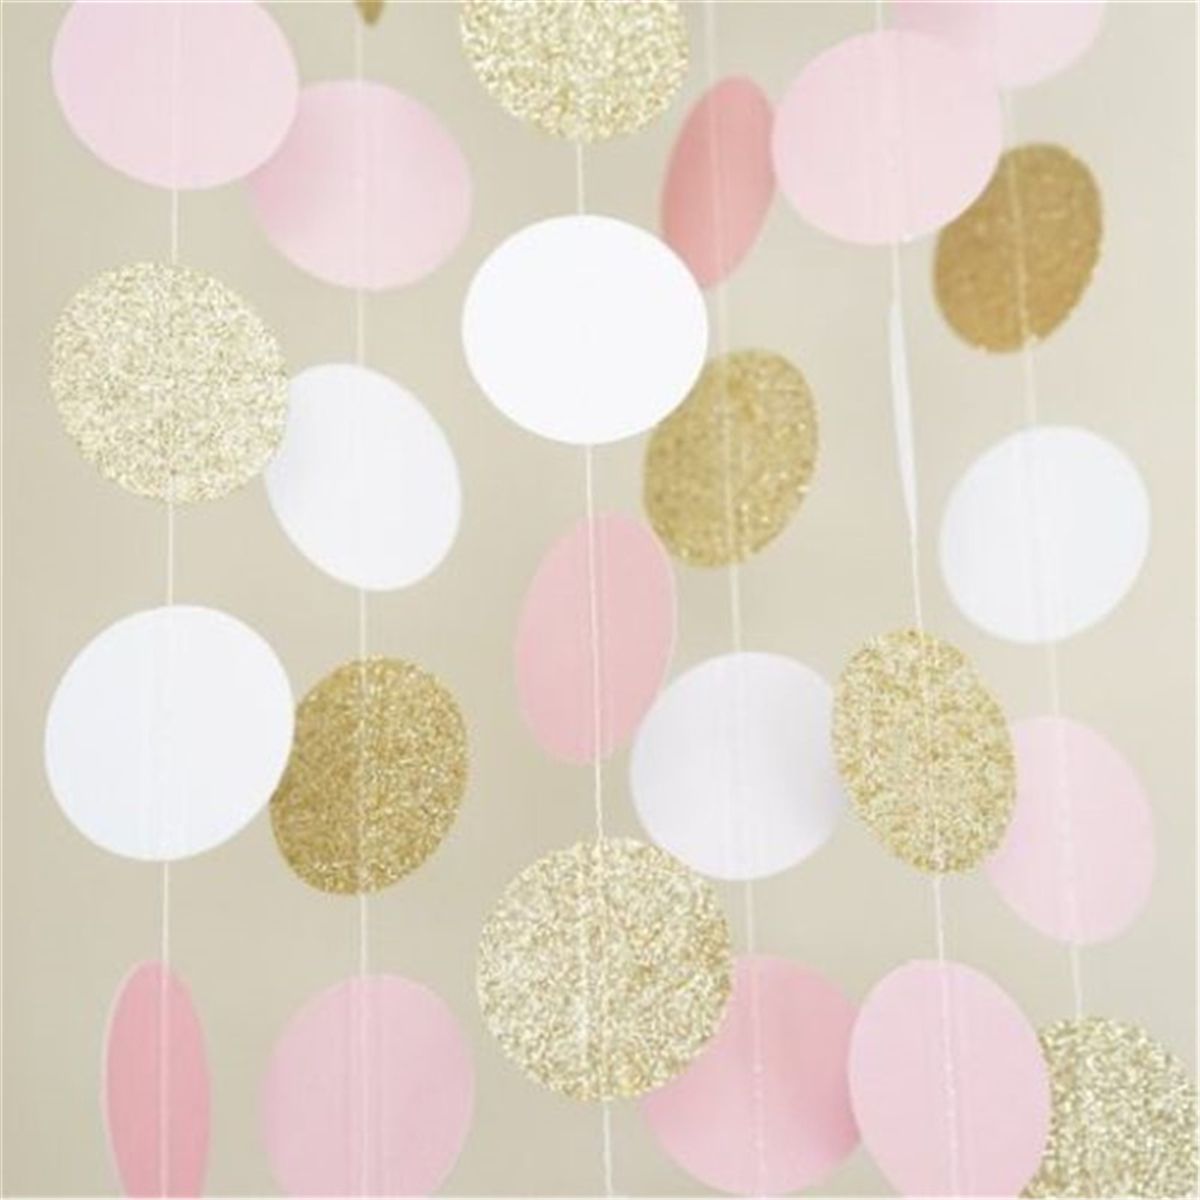 Pink-White-amp-Gold-Glitter-Circle-Polka-Dots-Paper-Garland-Banner-10FT-Banner-New-Decorations-1231112